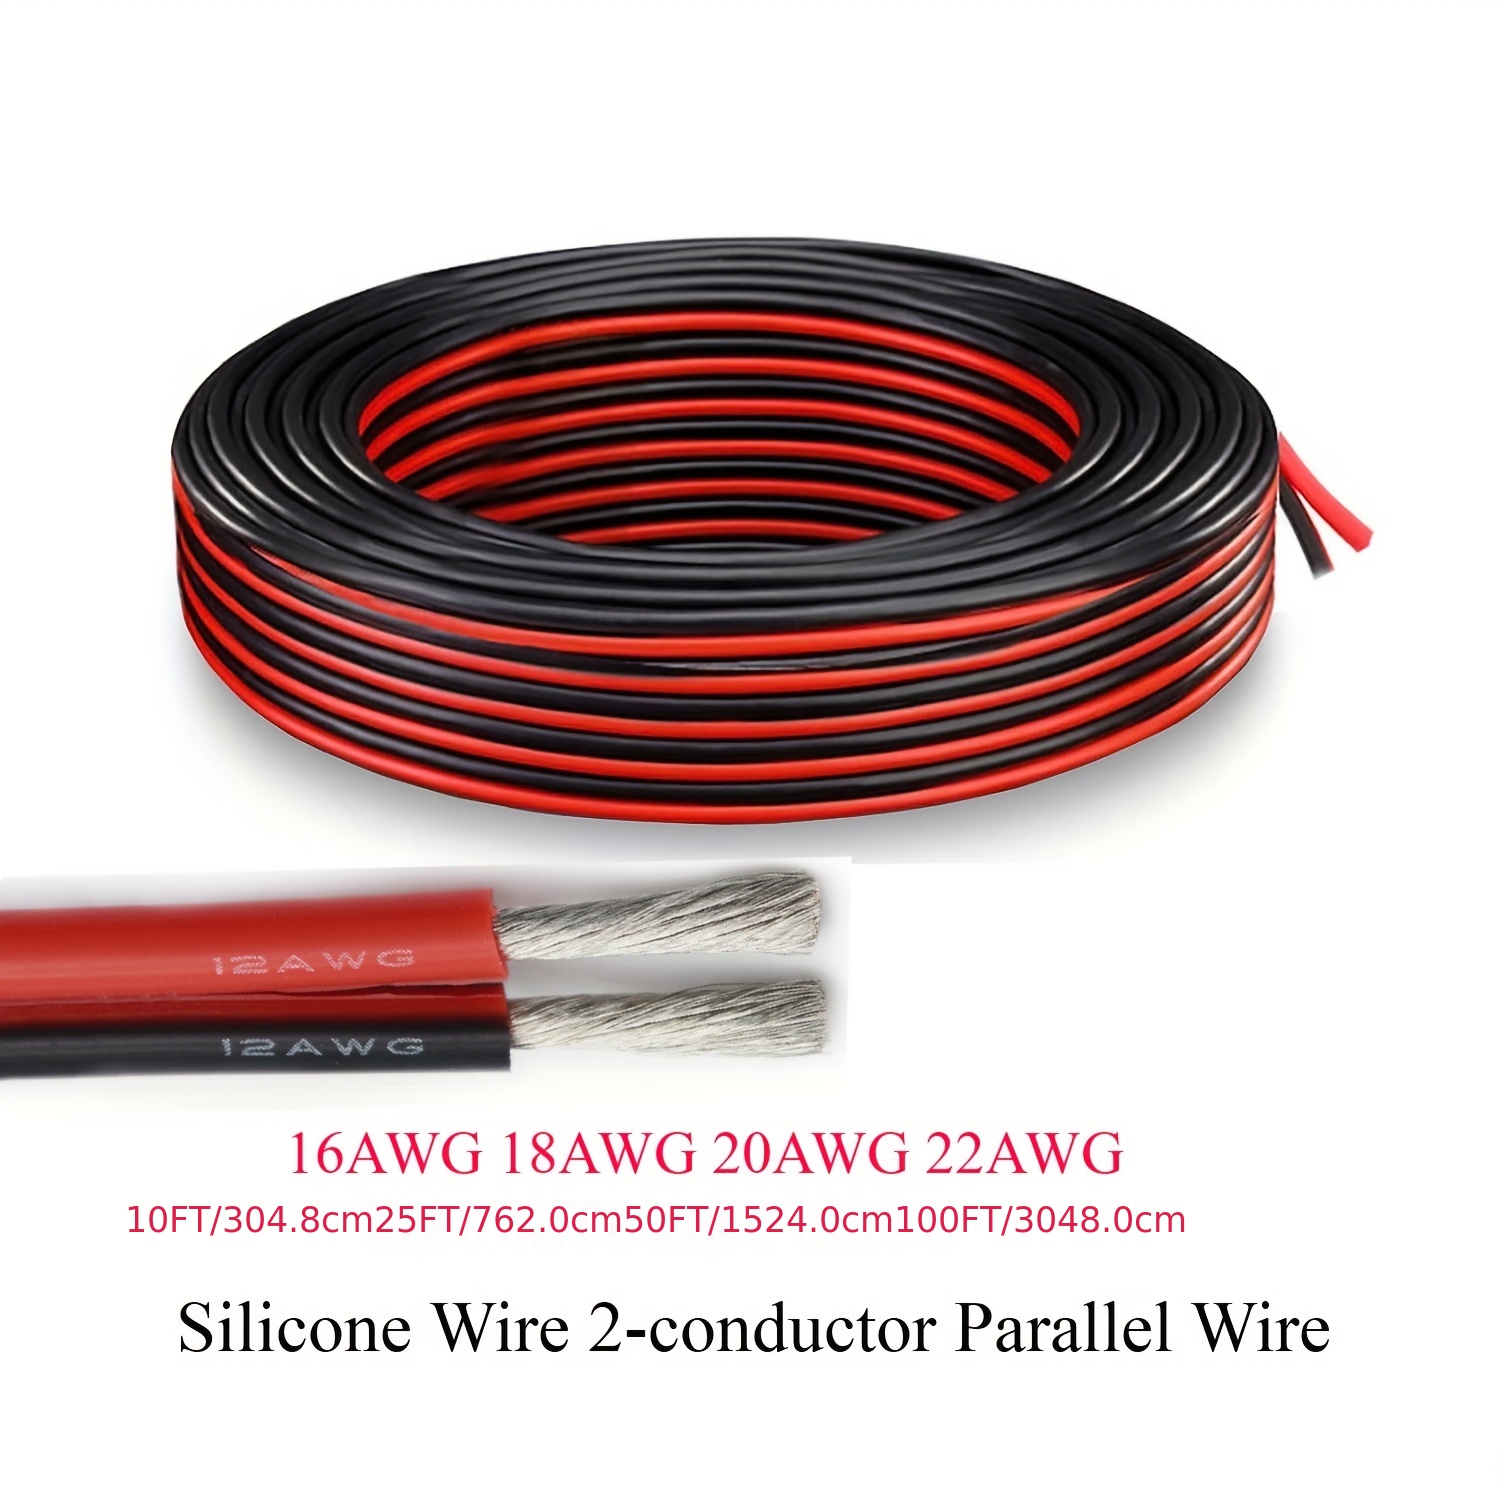 Haerkn 22 AWG Silicone Electrical Wire 2 Conductor Parallel Wire Line 200ft [Black 100ft Red 100ft] 22 Gauge Soft and Flexible Hook Up Oxygen Free